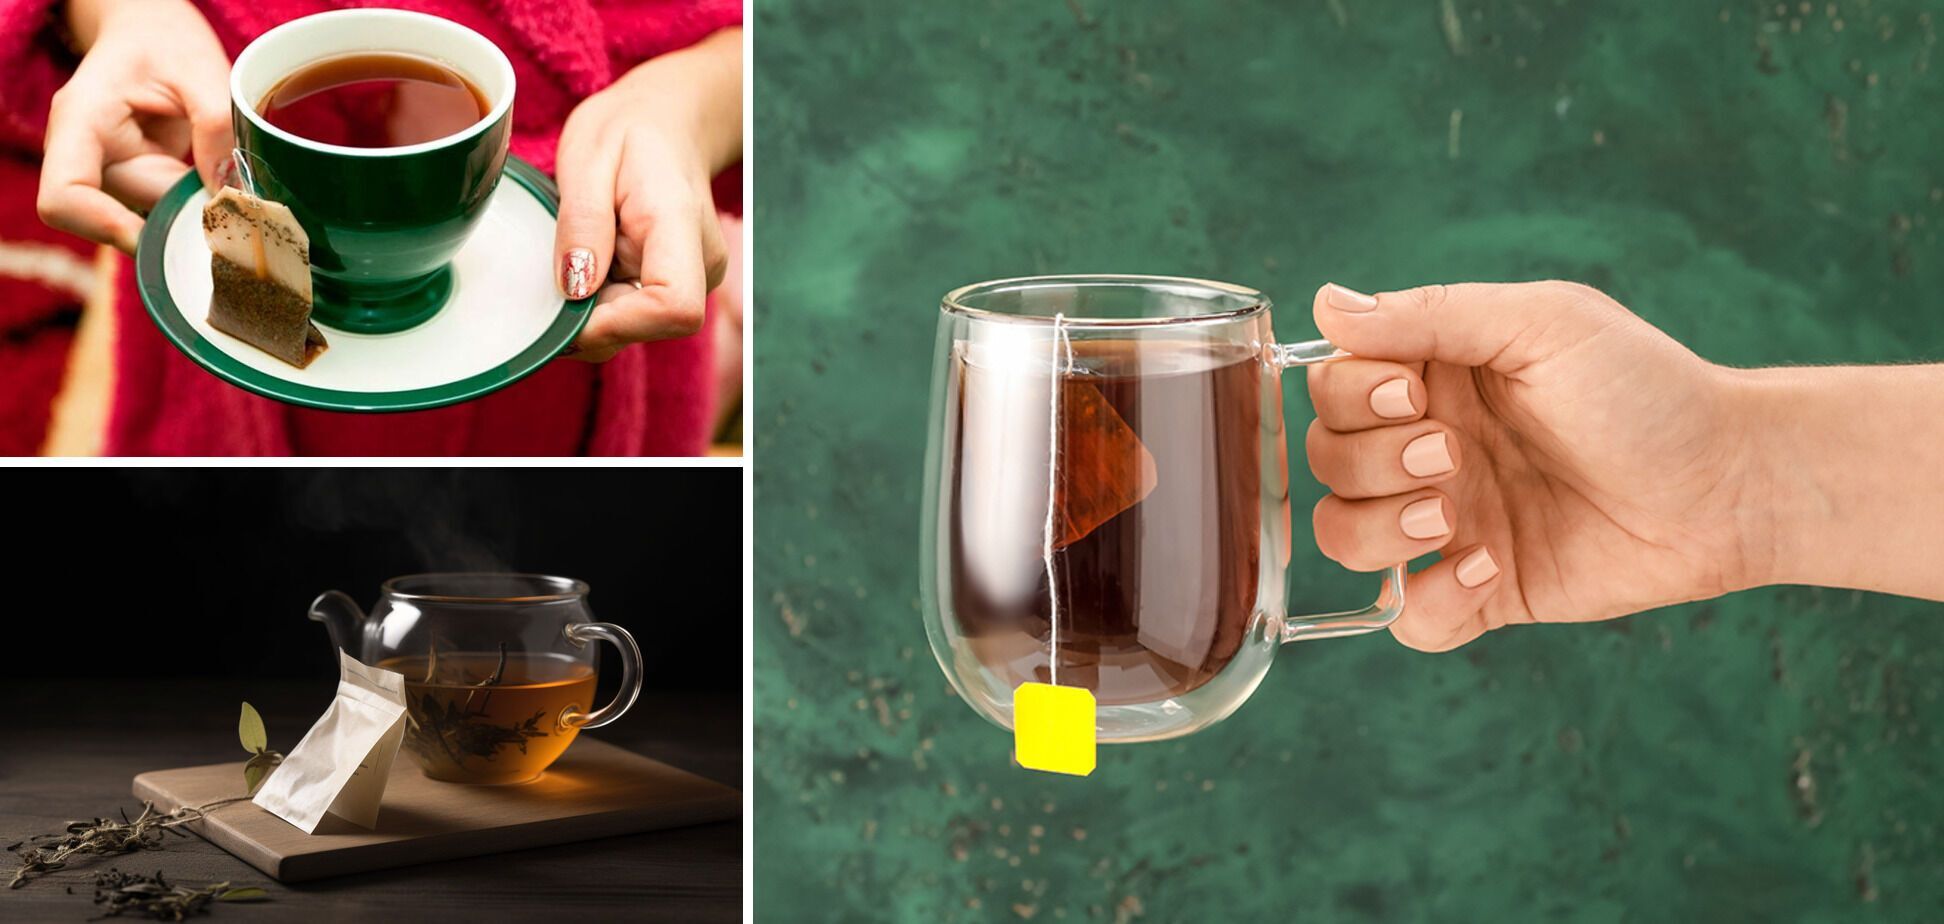 You're brewing tea incorrectly: how to use a tea bag and why you shouldn't squeeze it